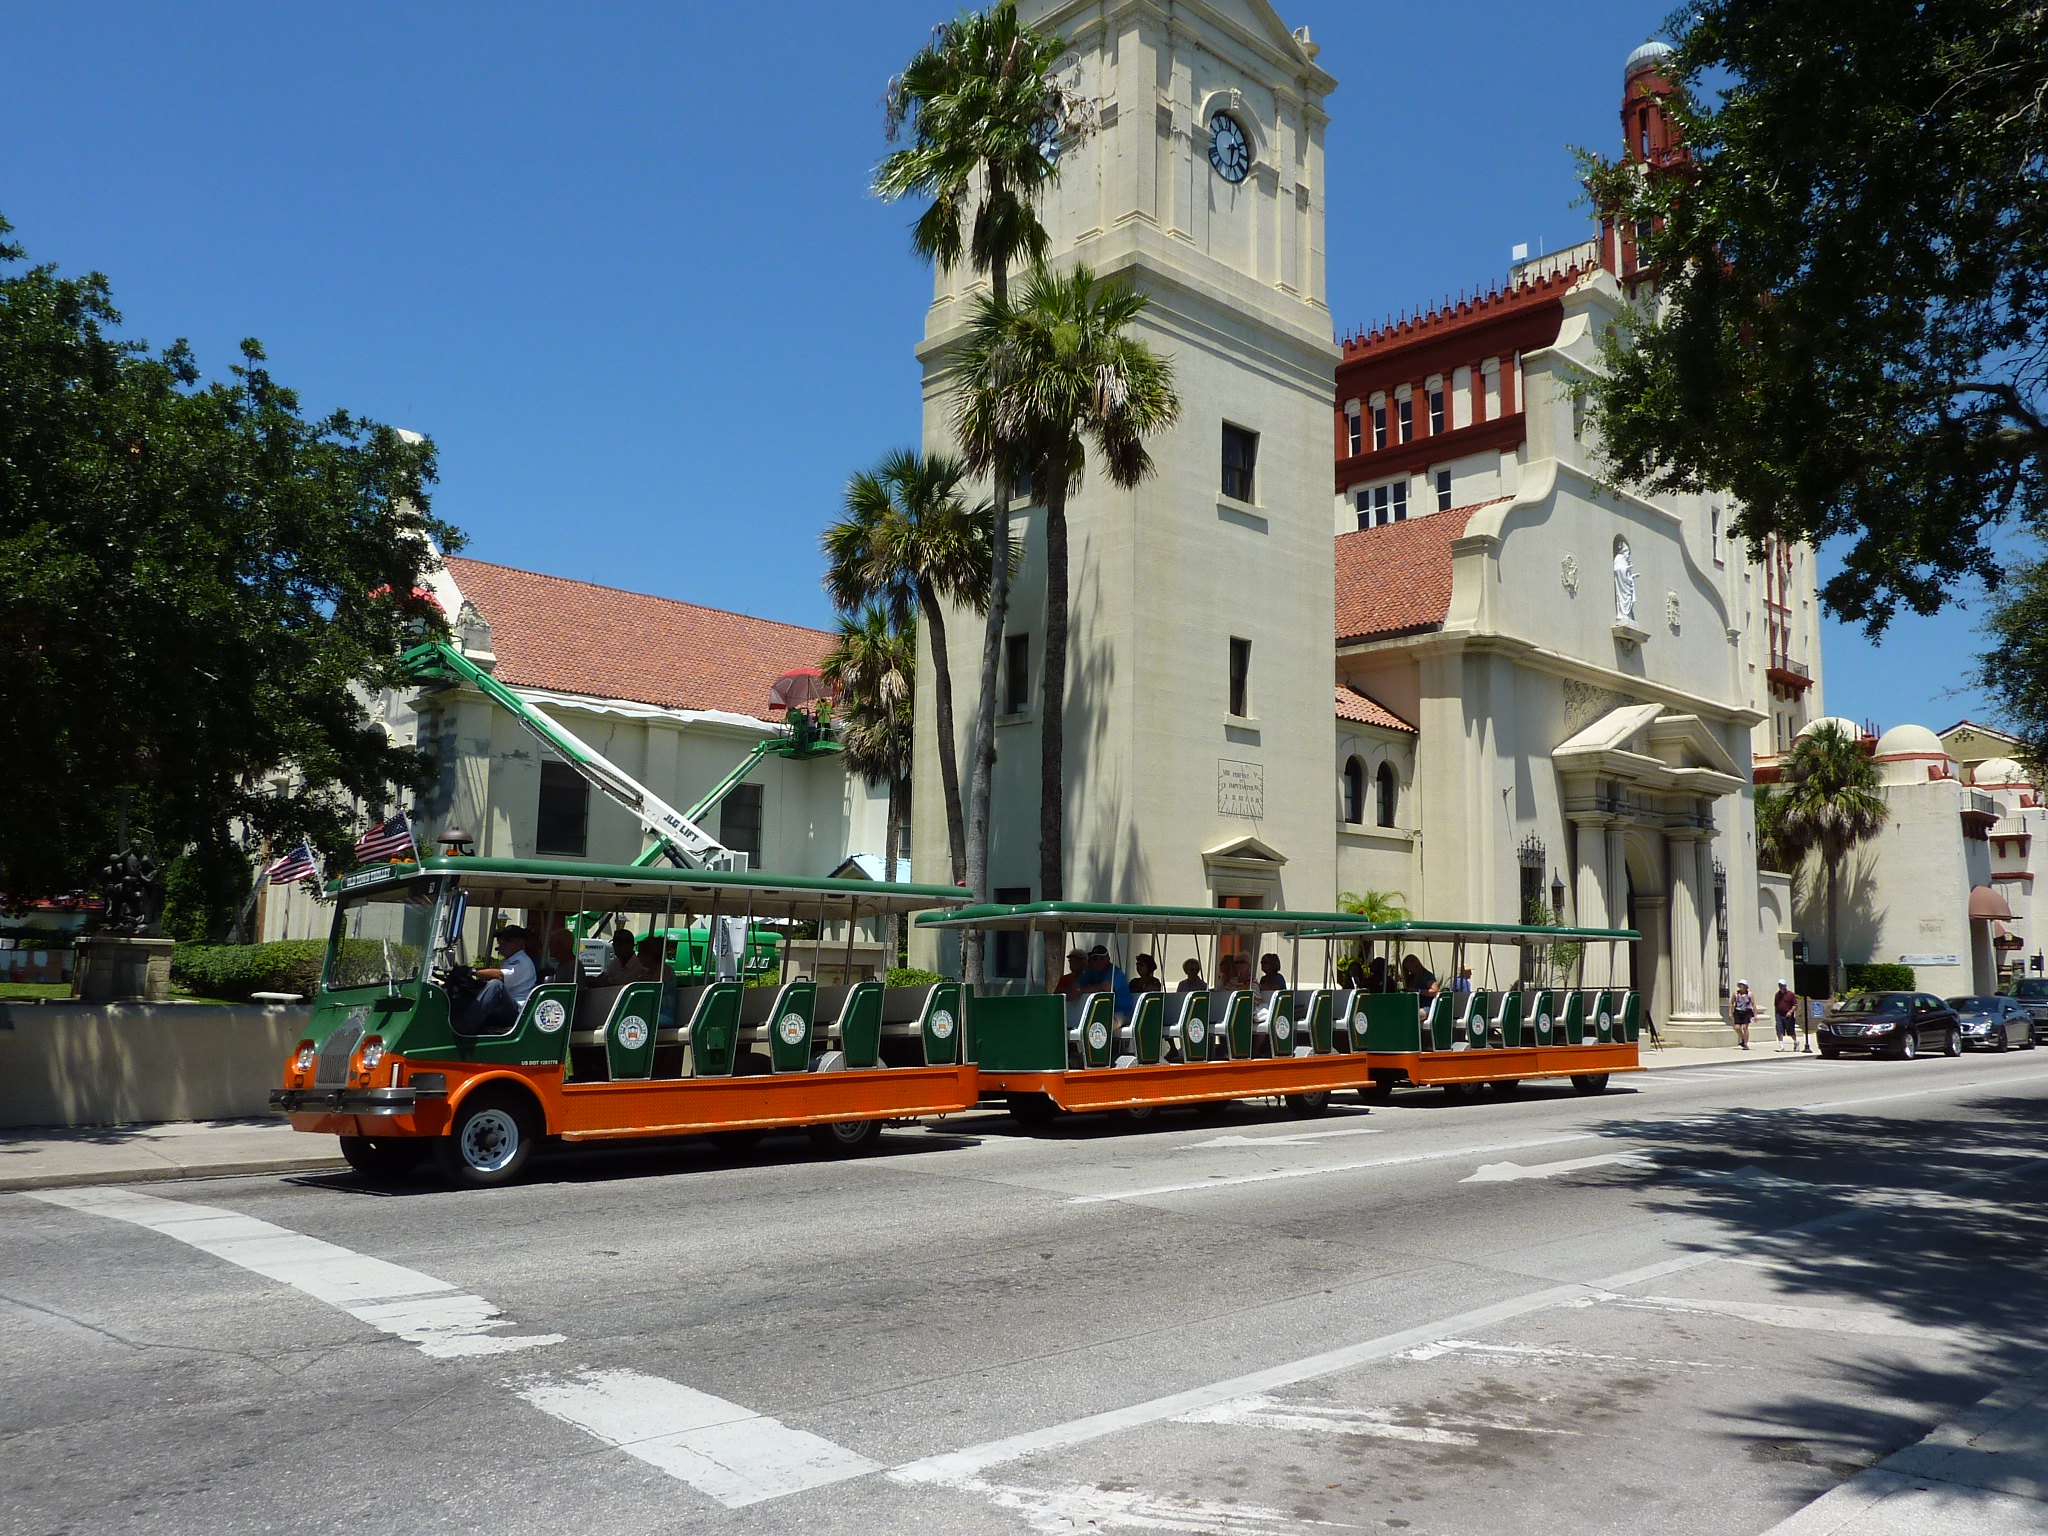 <p>This is considered to be <strong>one of the oldest settlements in Florida,</strong> and it’s home to some of the best historic architecture in the state. </p>  <p>One of the most popular attractions is Flagler College. It was built as a hotel in the late 19th century by railroad magnate Henry Flagler. Now, it’s one f the most photographed buildings in St. Augustine.</p>